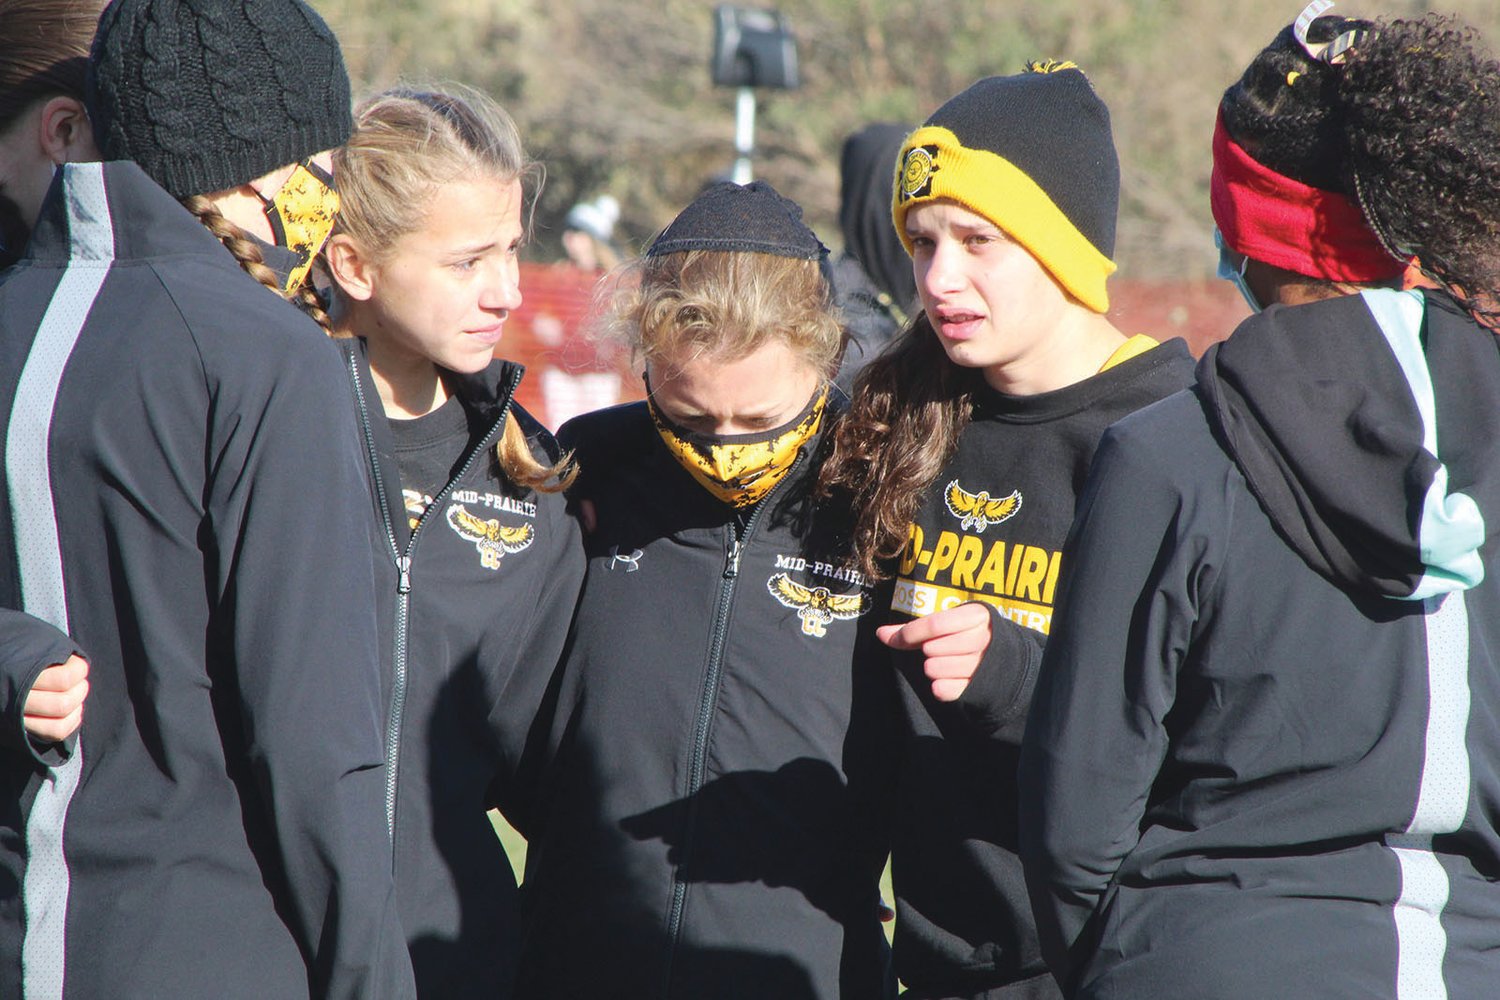 Members of Mid-Prairie’s girls cross country team huddle for an inspirational talk just before the start of the state championship race on Oct. 31.